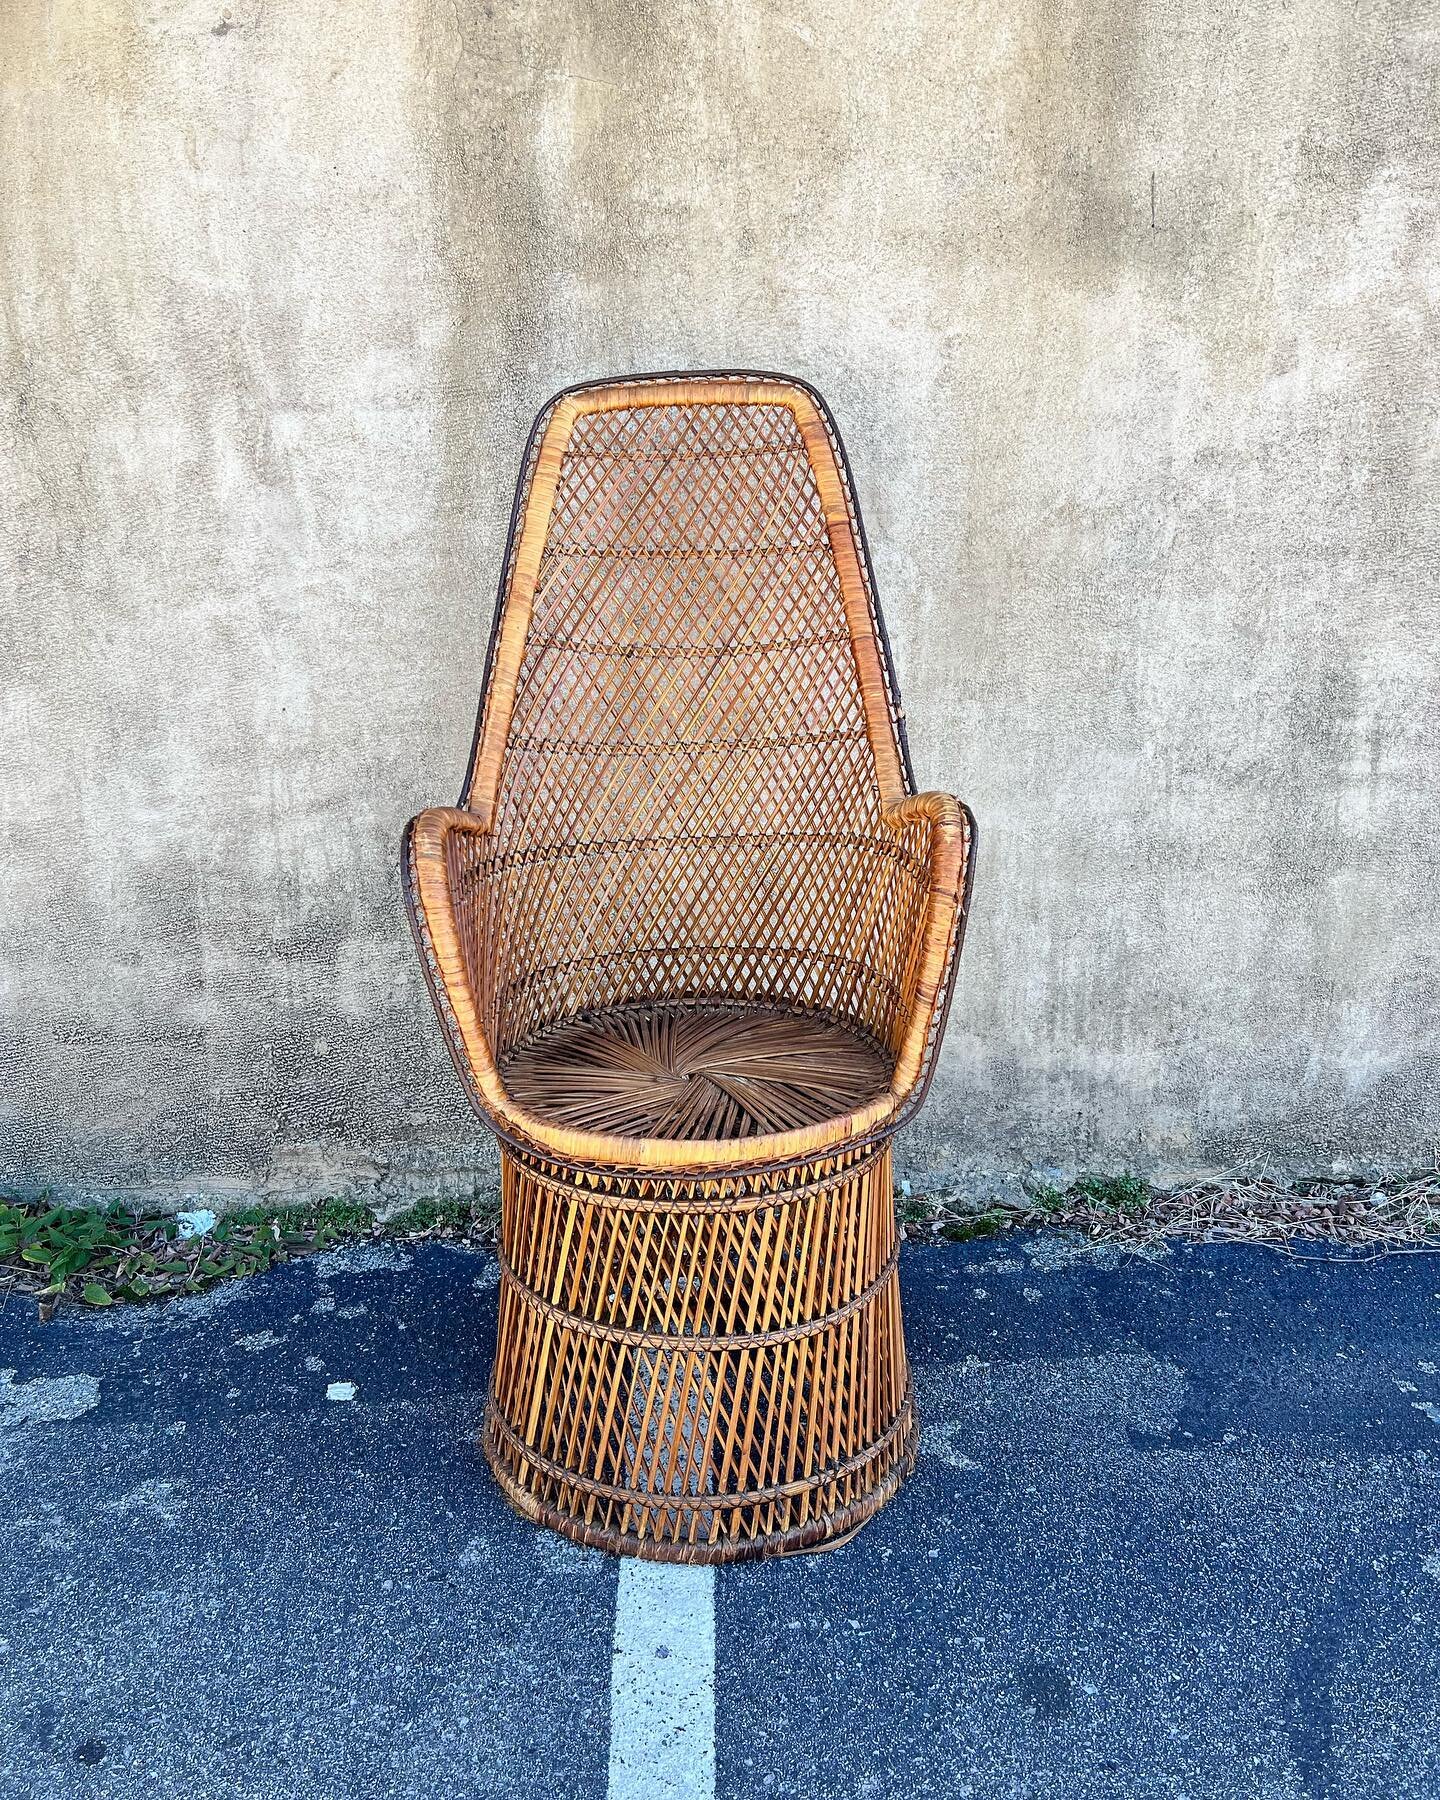 Vintage wicker barbell base chair with removable top for extra storage! Perfect for a nursery or a smaller apartment! 
&bull;
48.5&rdquo; tall
22&rdquo; wide
$125 (Delivery options available)